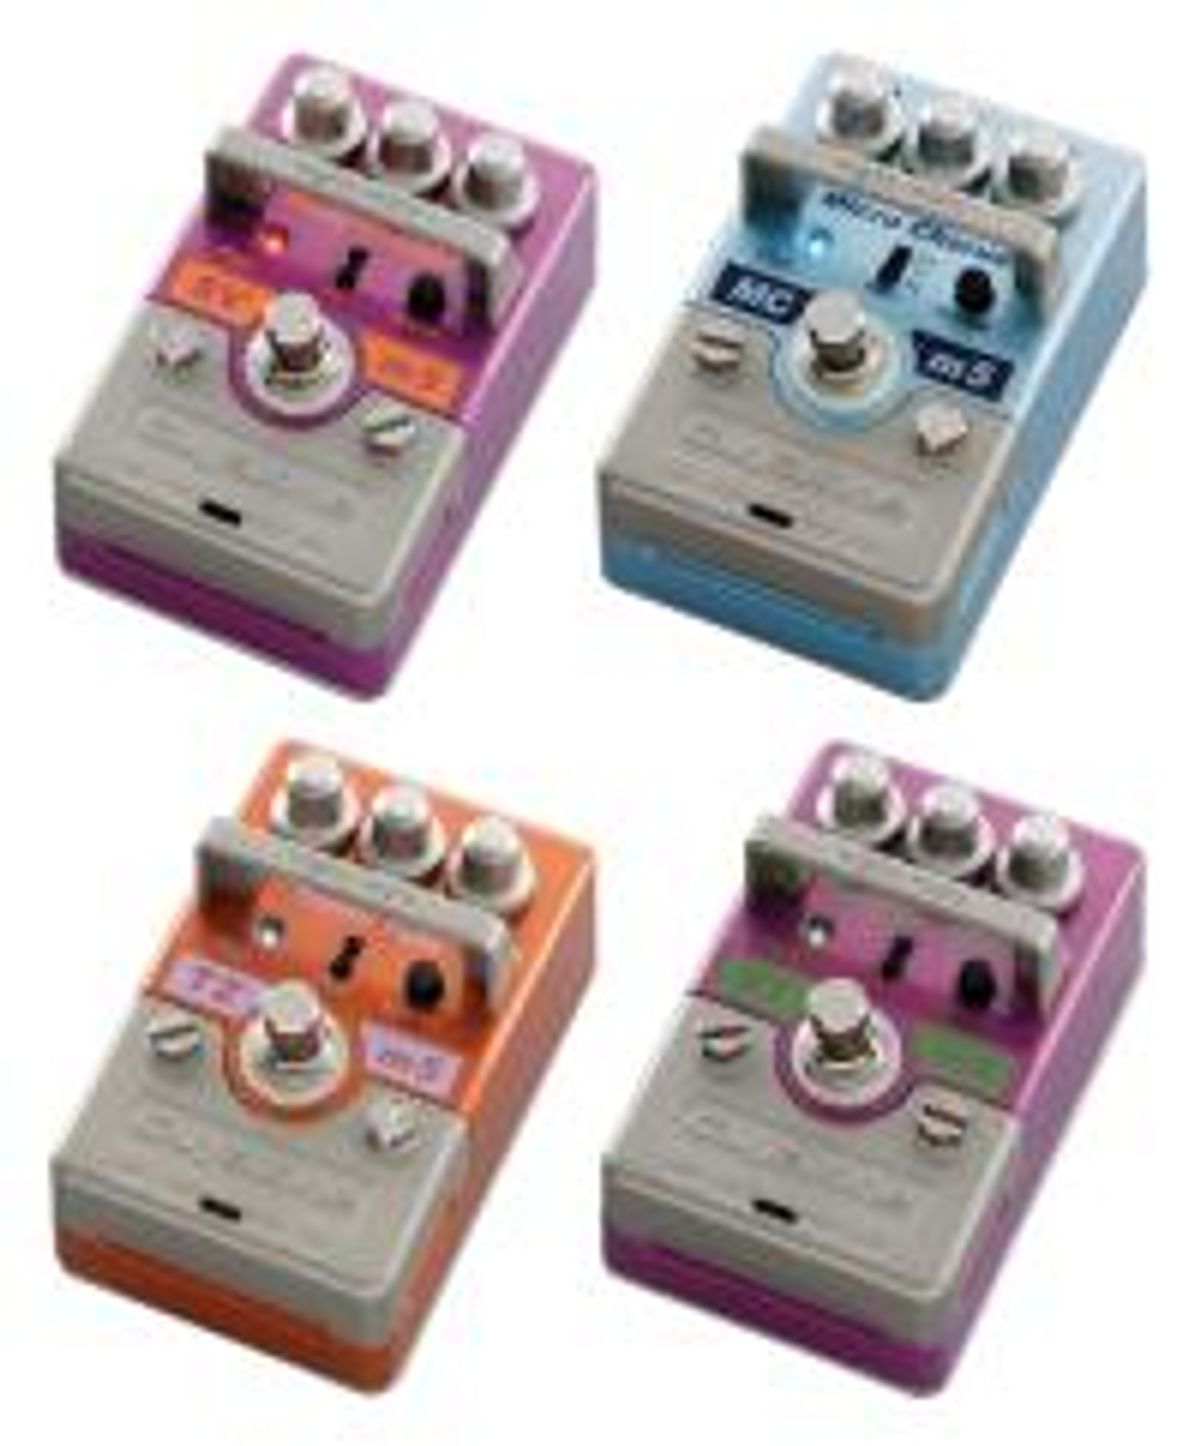 Guyatone Releases Second Batch of Mighty Micros